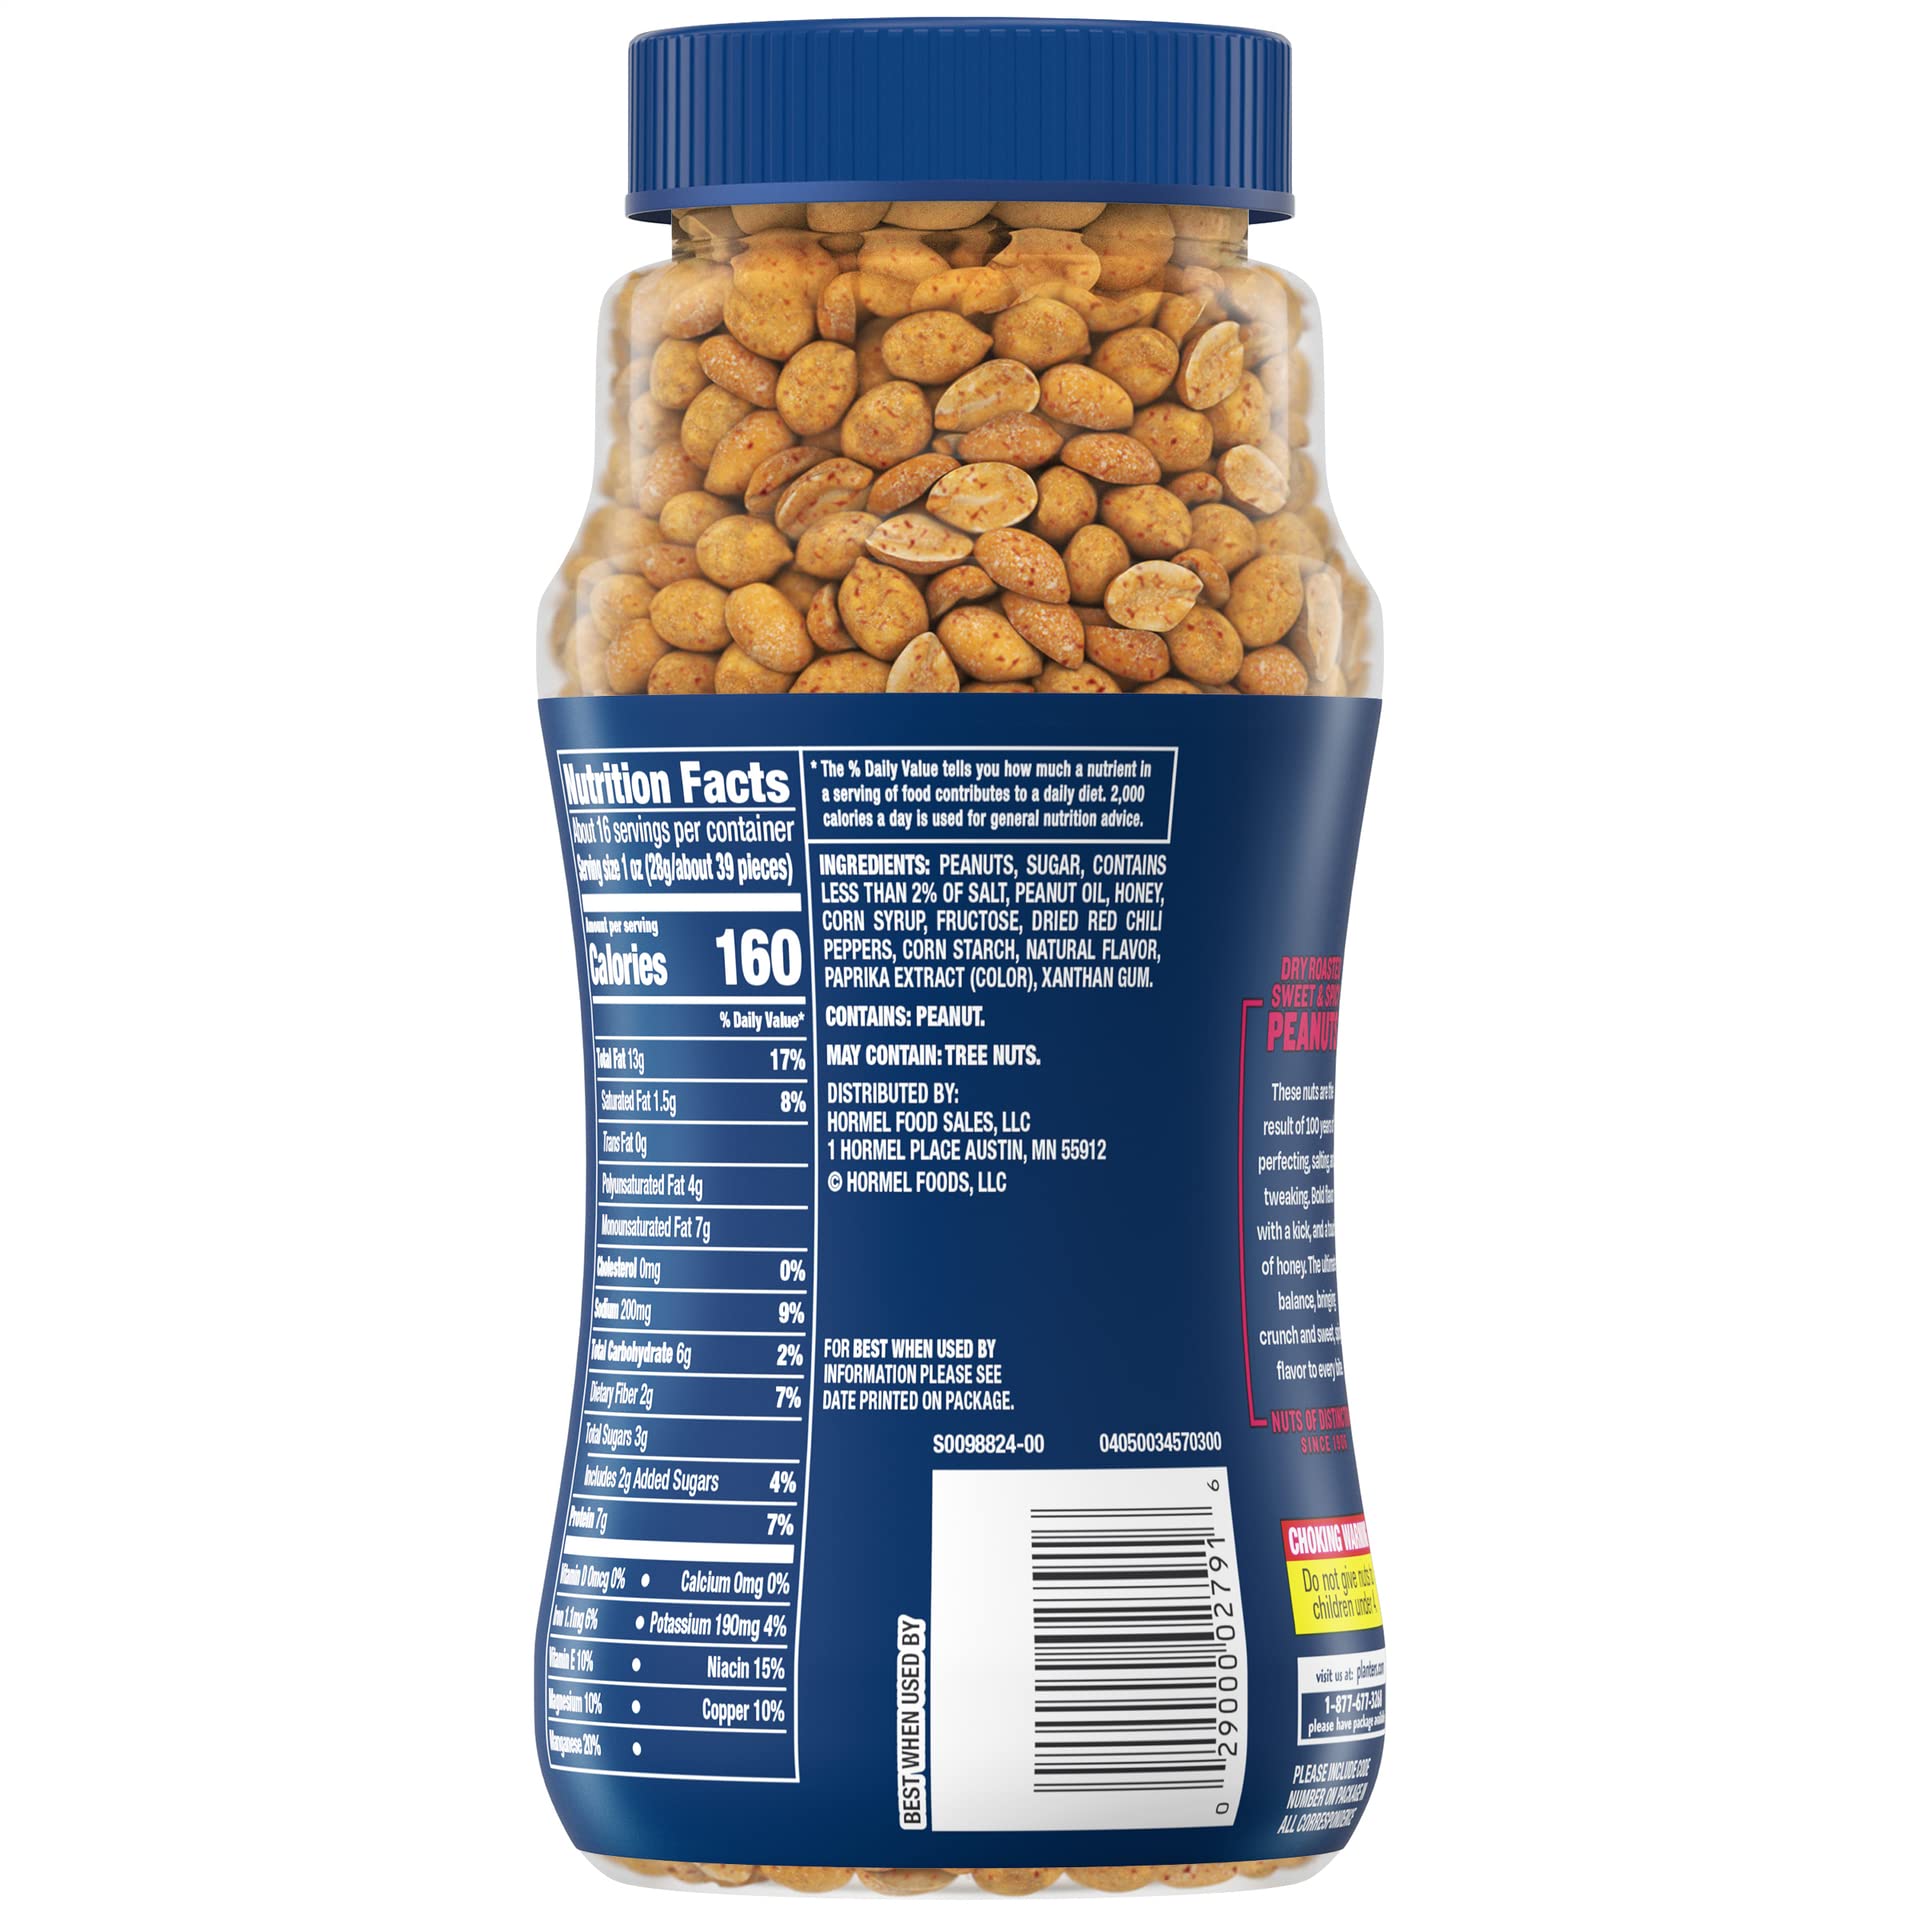 Planters Sweet and Spicy Dry Roasted Peanuts, 16 oz.